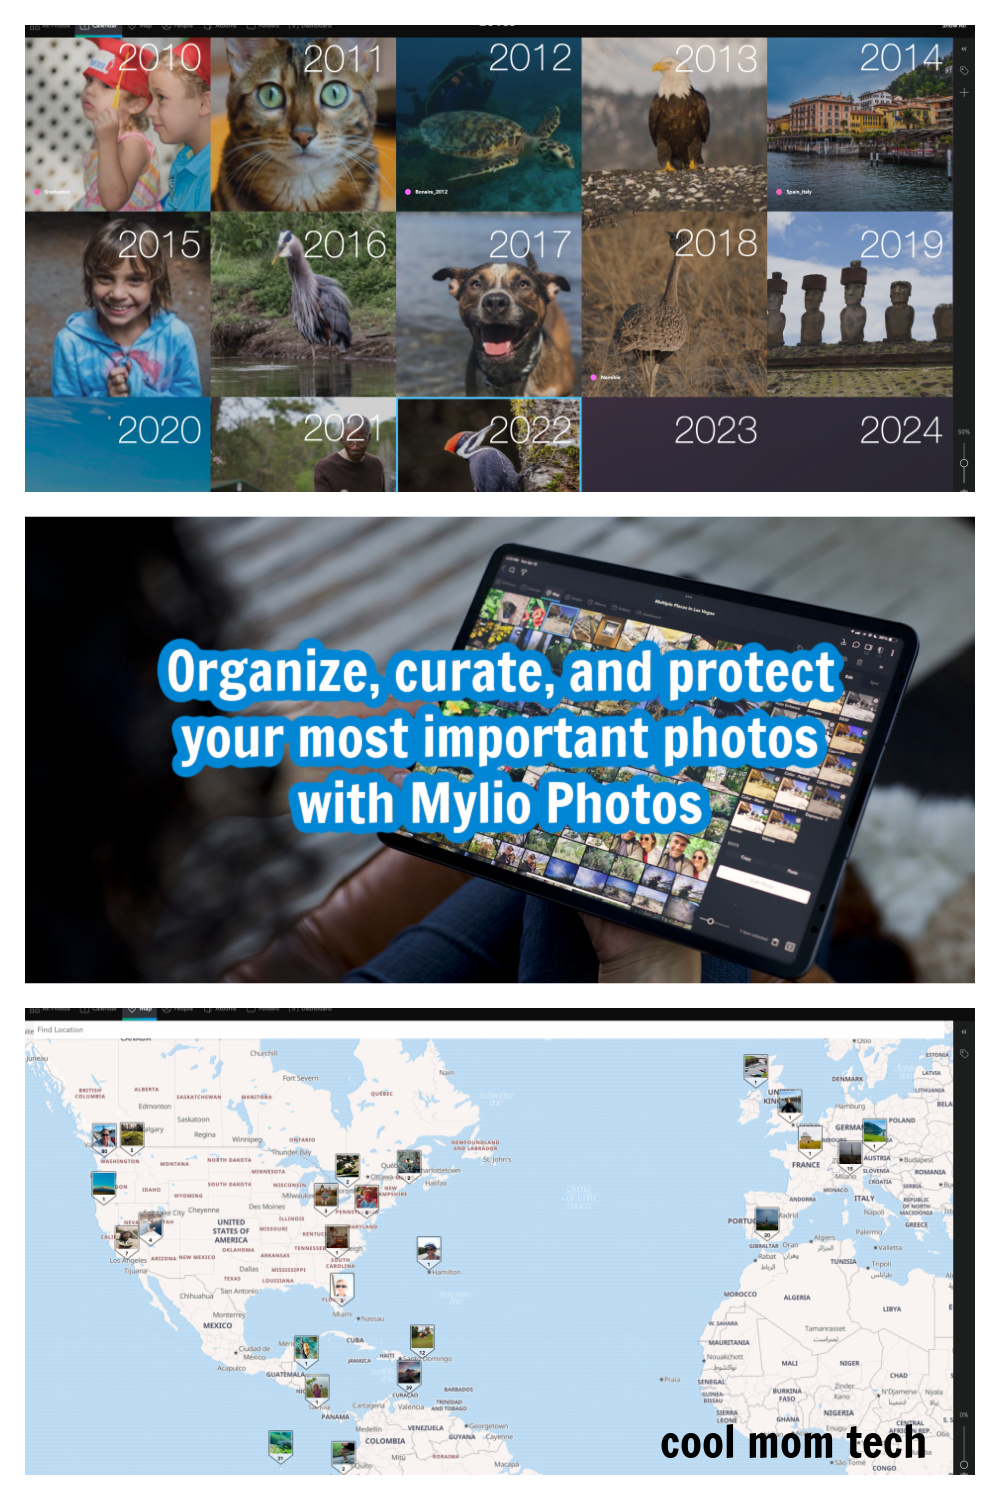 Mylio photo organization for all your photos, videos, and documents - save 20%! | Sponsor